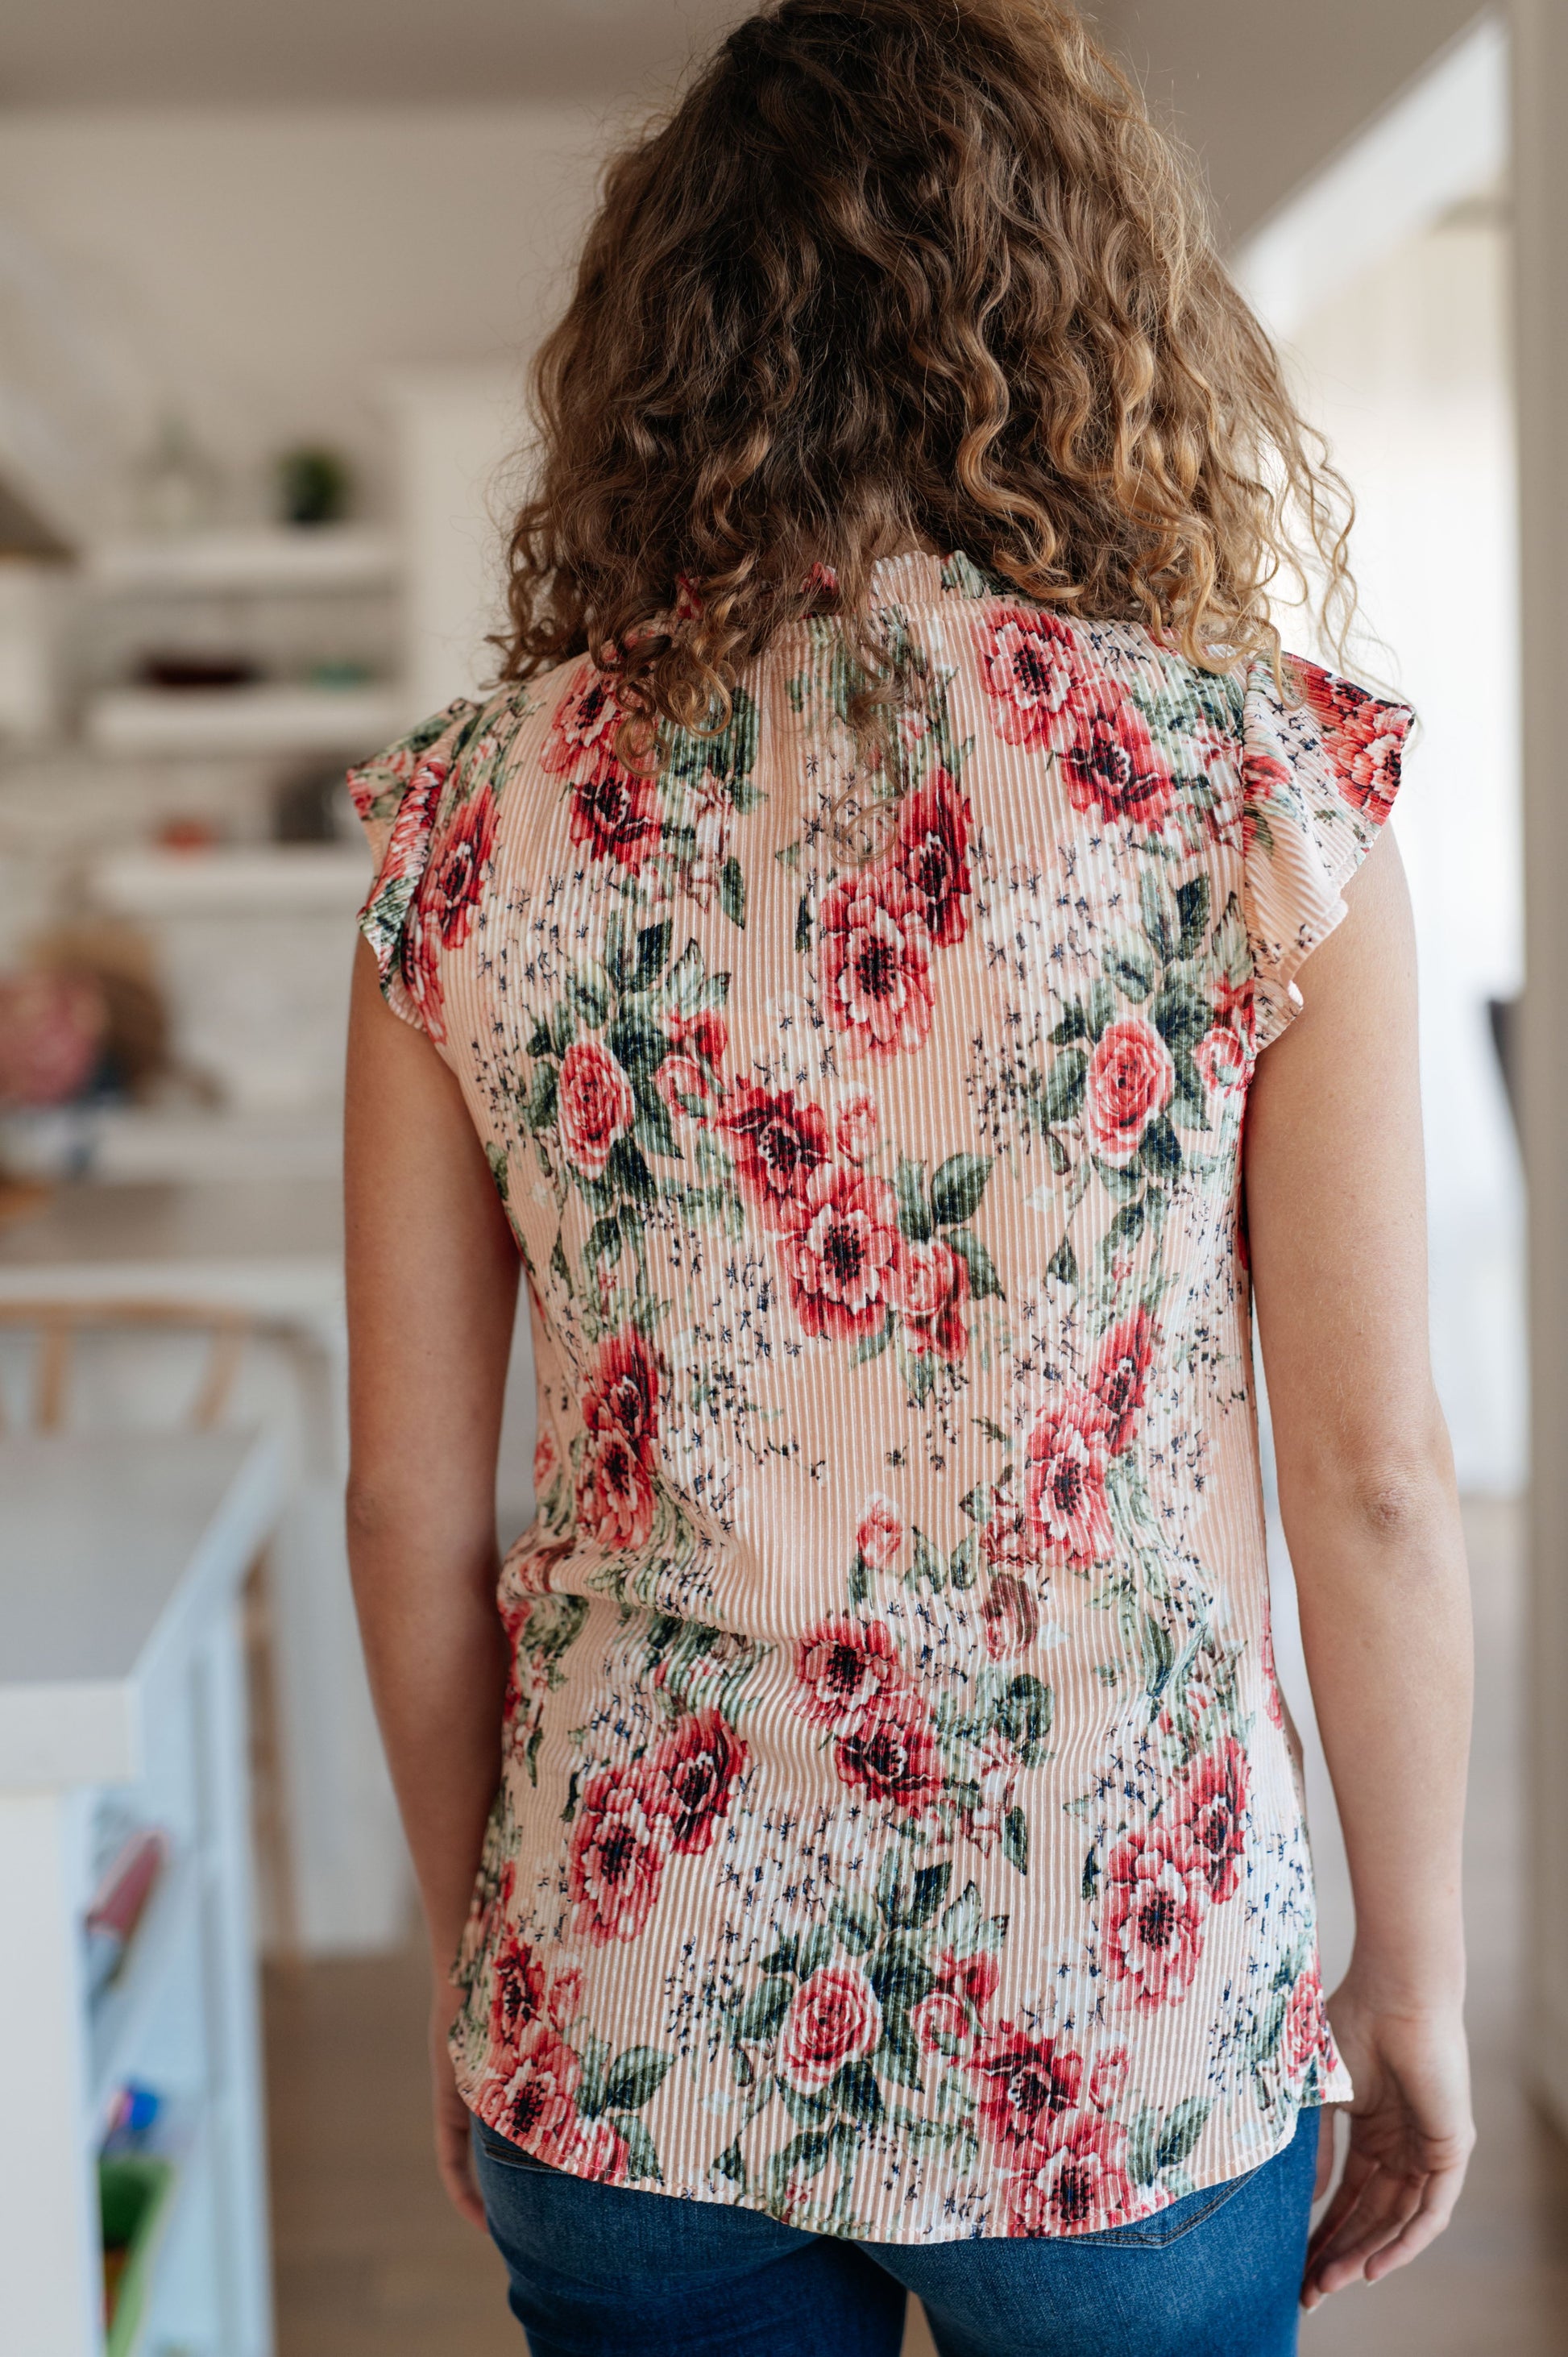 Making Me Blush Floral Top - Three Bears Boutique